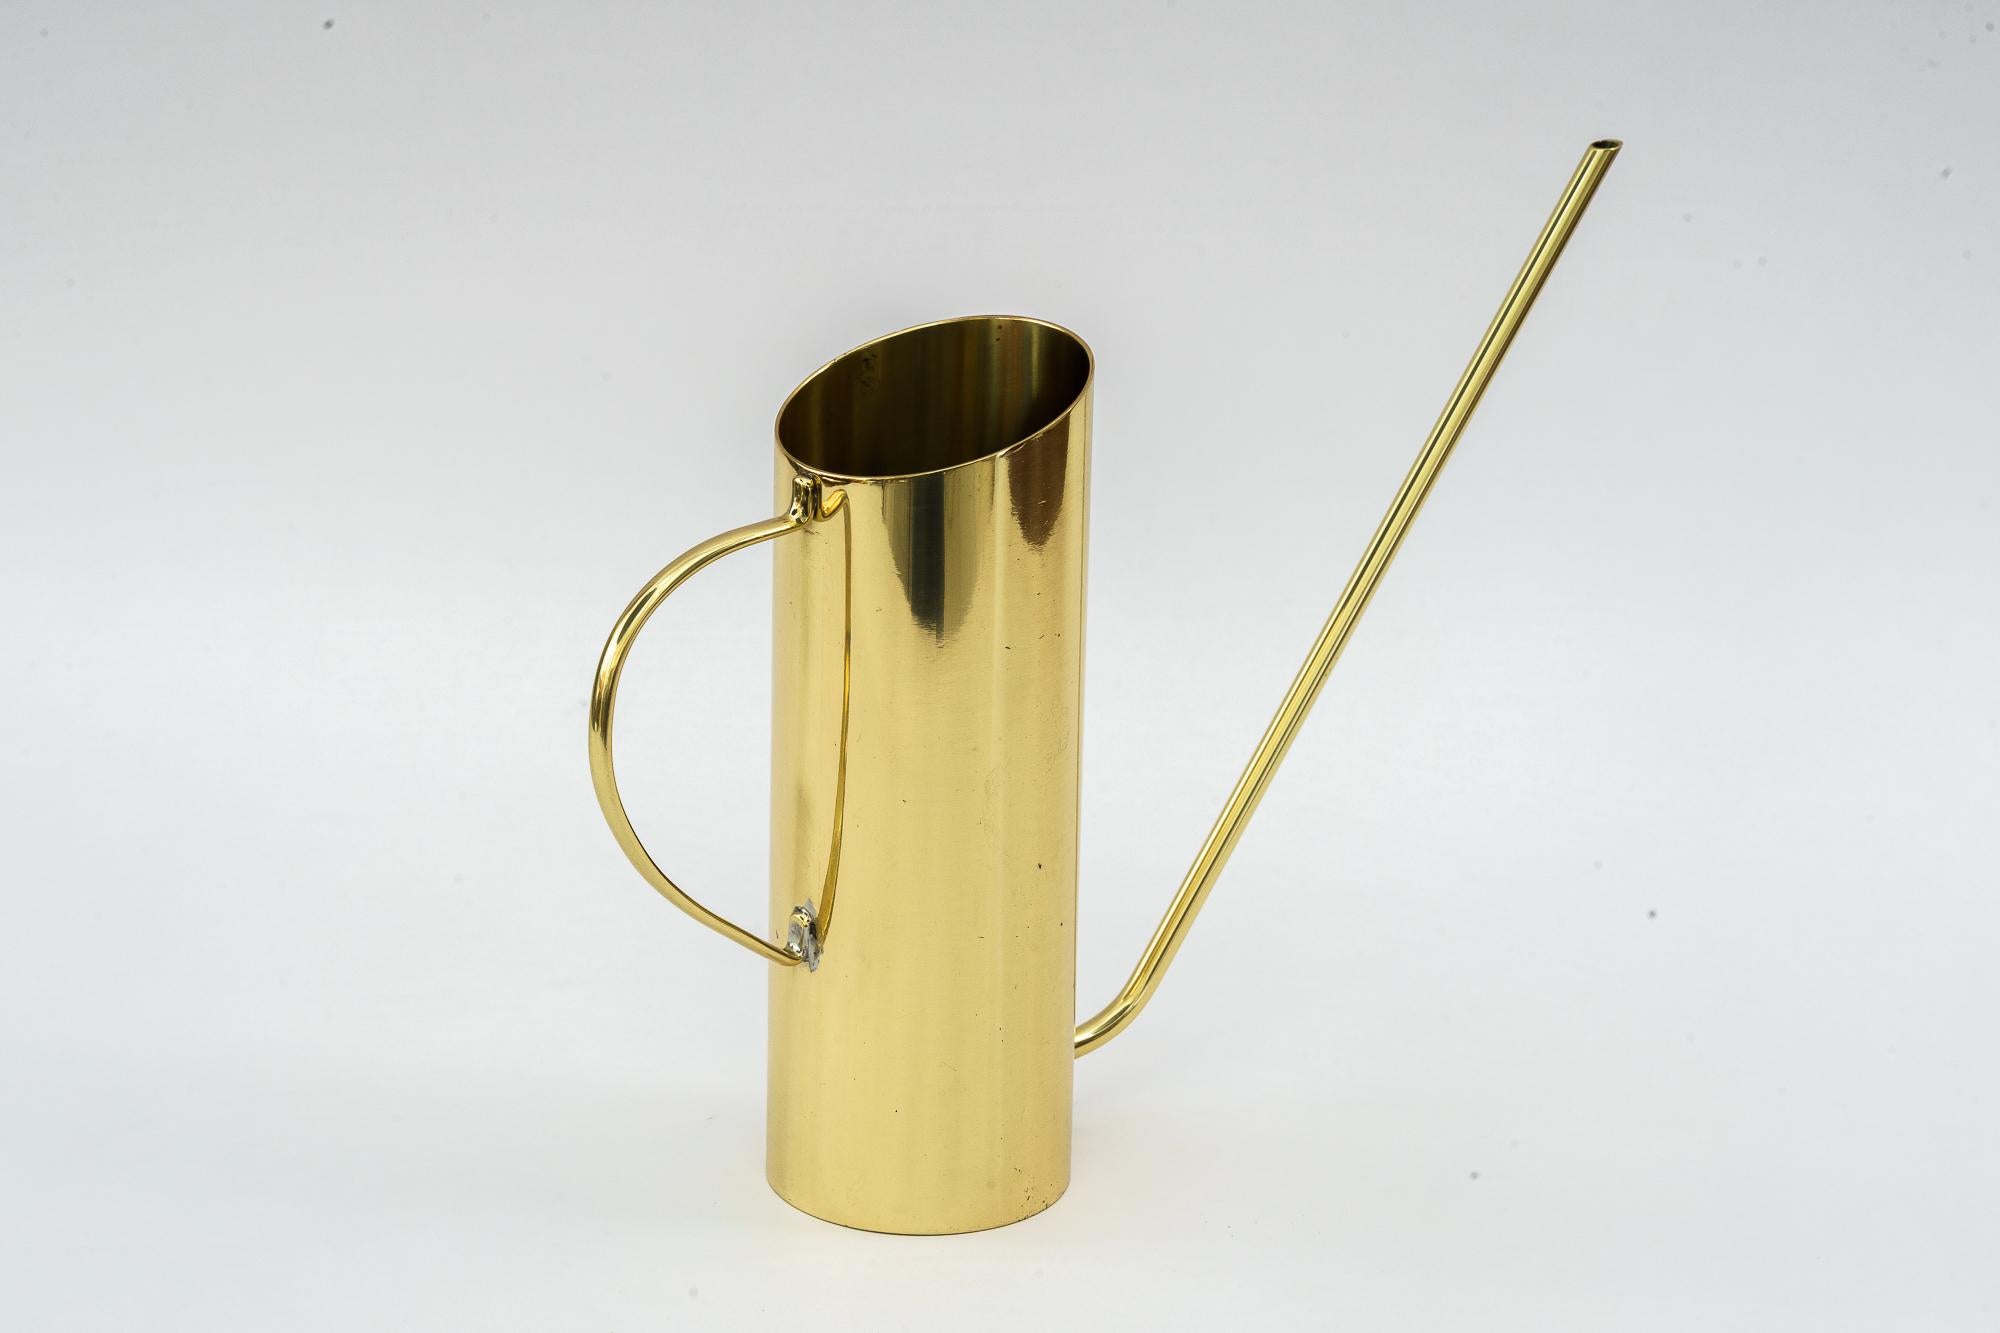 Hagenauer watering can vienna around 1950s ( marked )
Brass polished and stove enameled